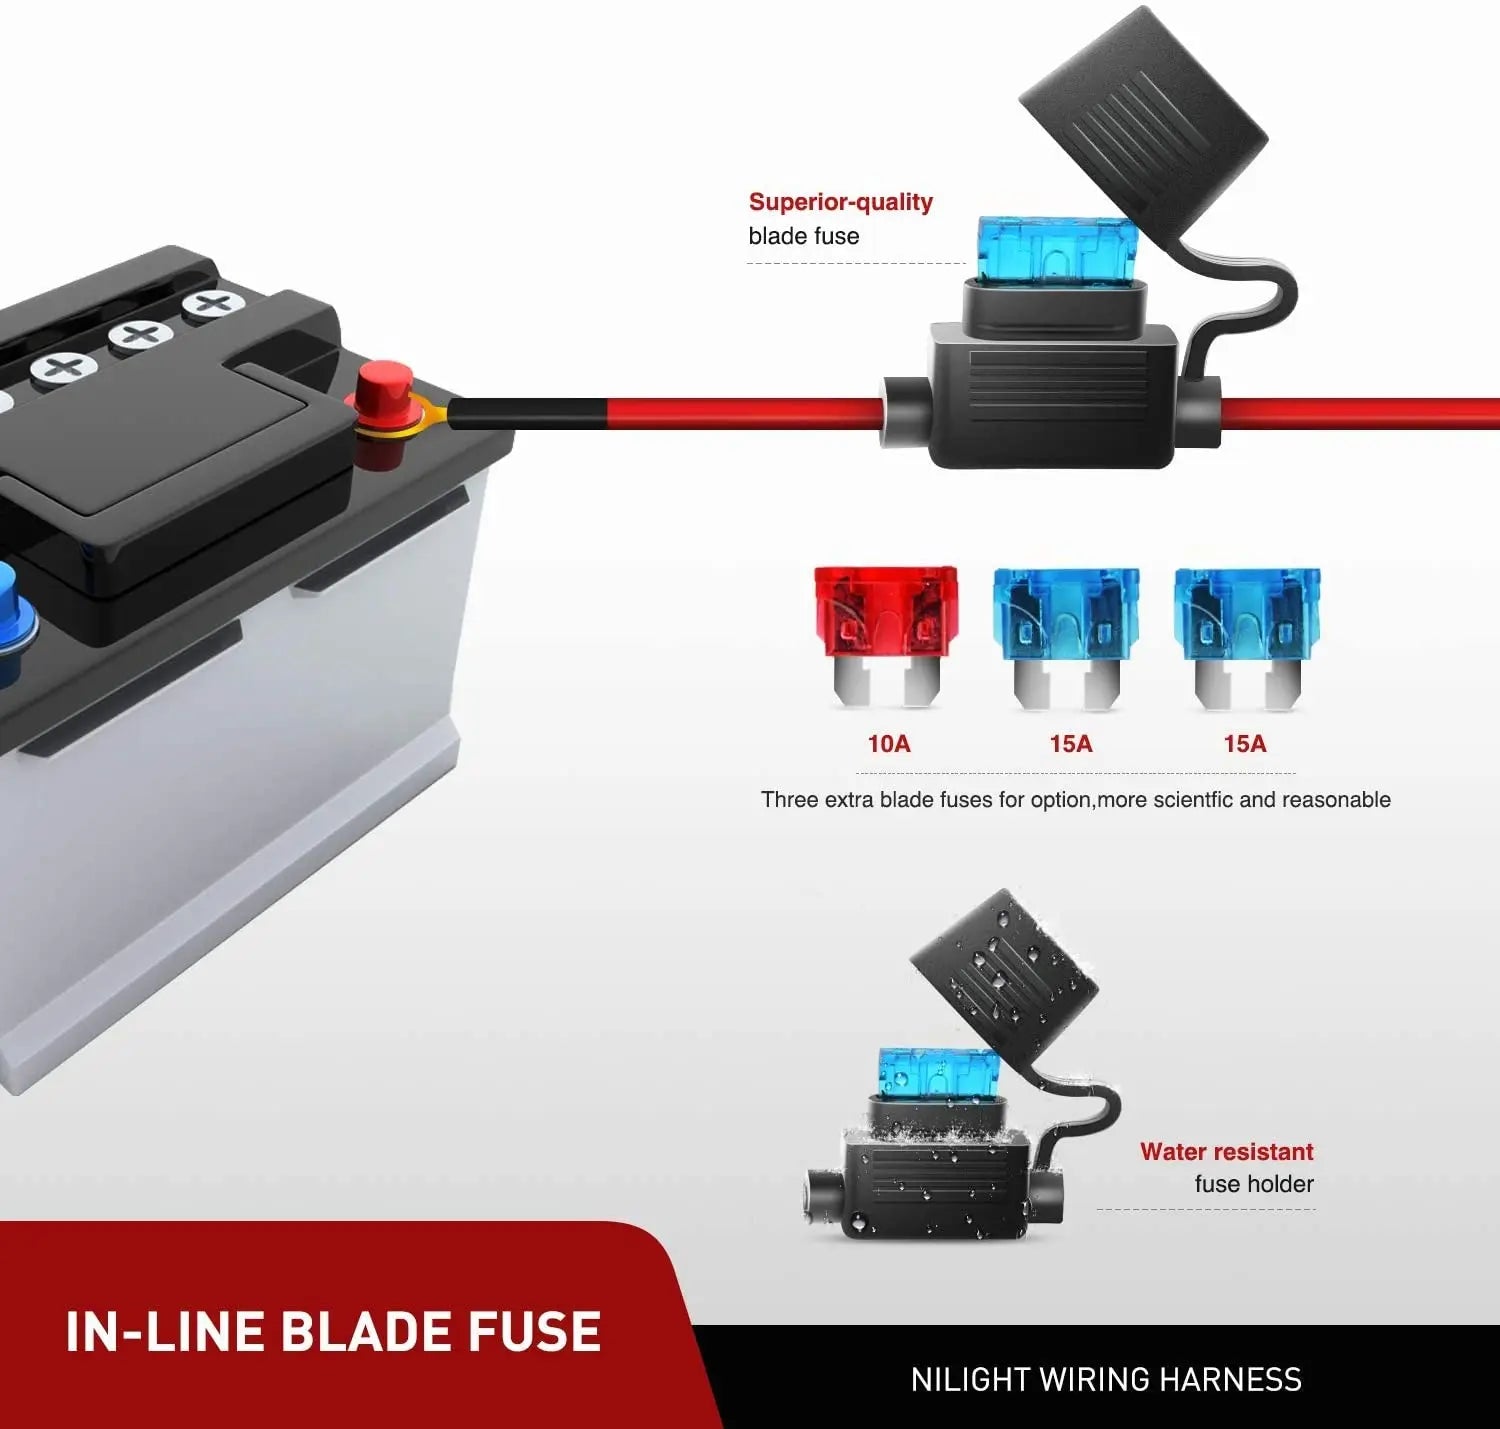  Nilight IN-LINE BLADE FUSE